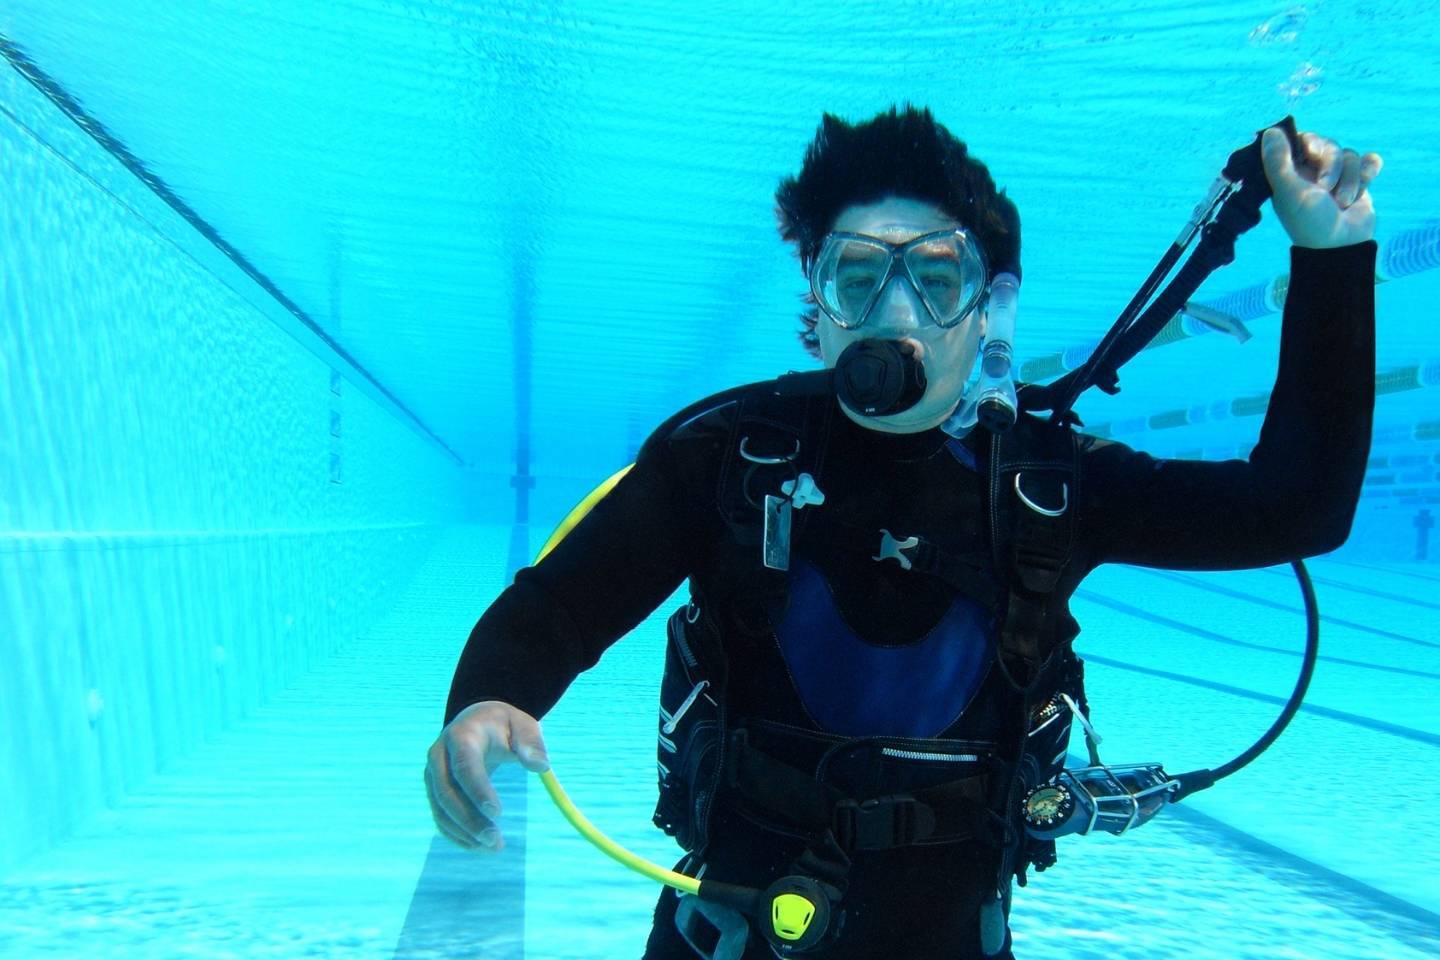 Scuba diver in clean swimming pool during scuba diving lesson